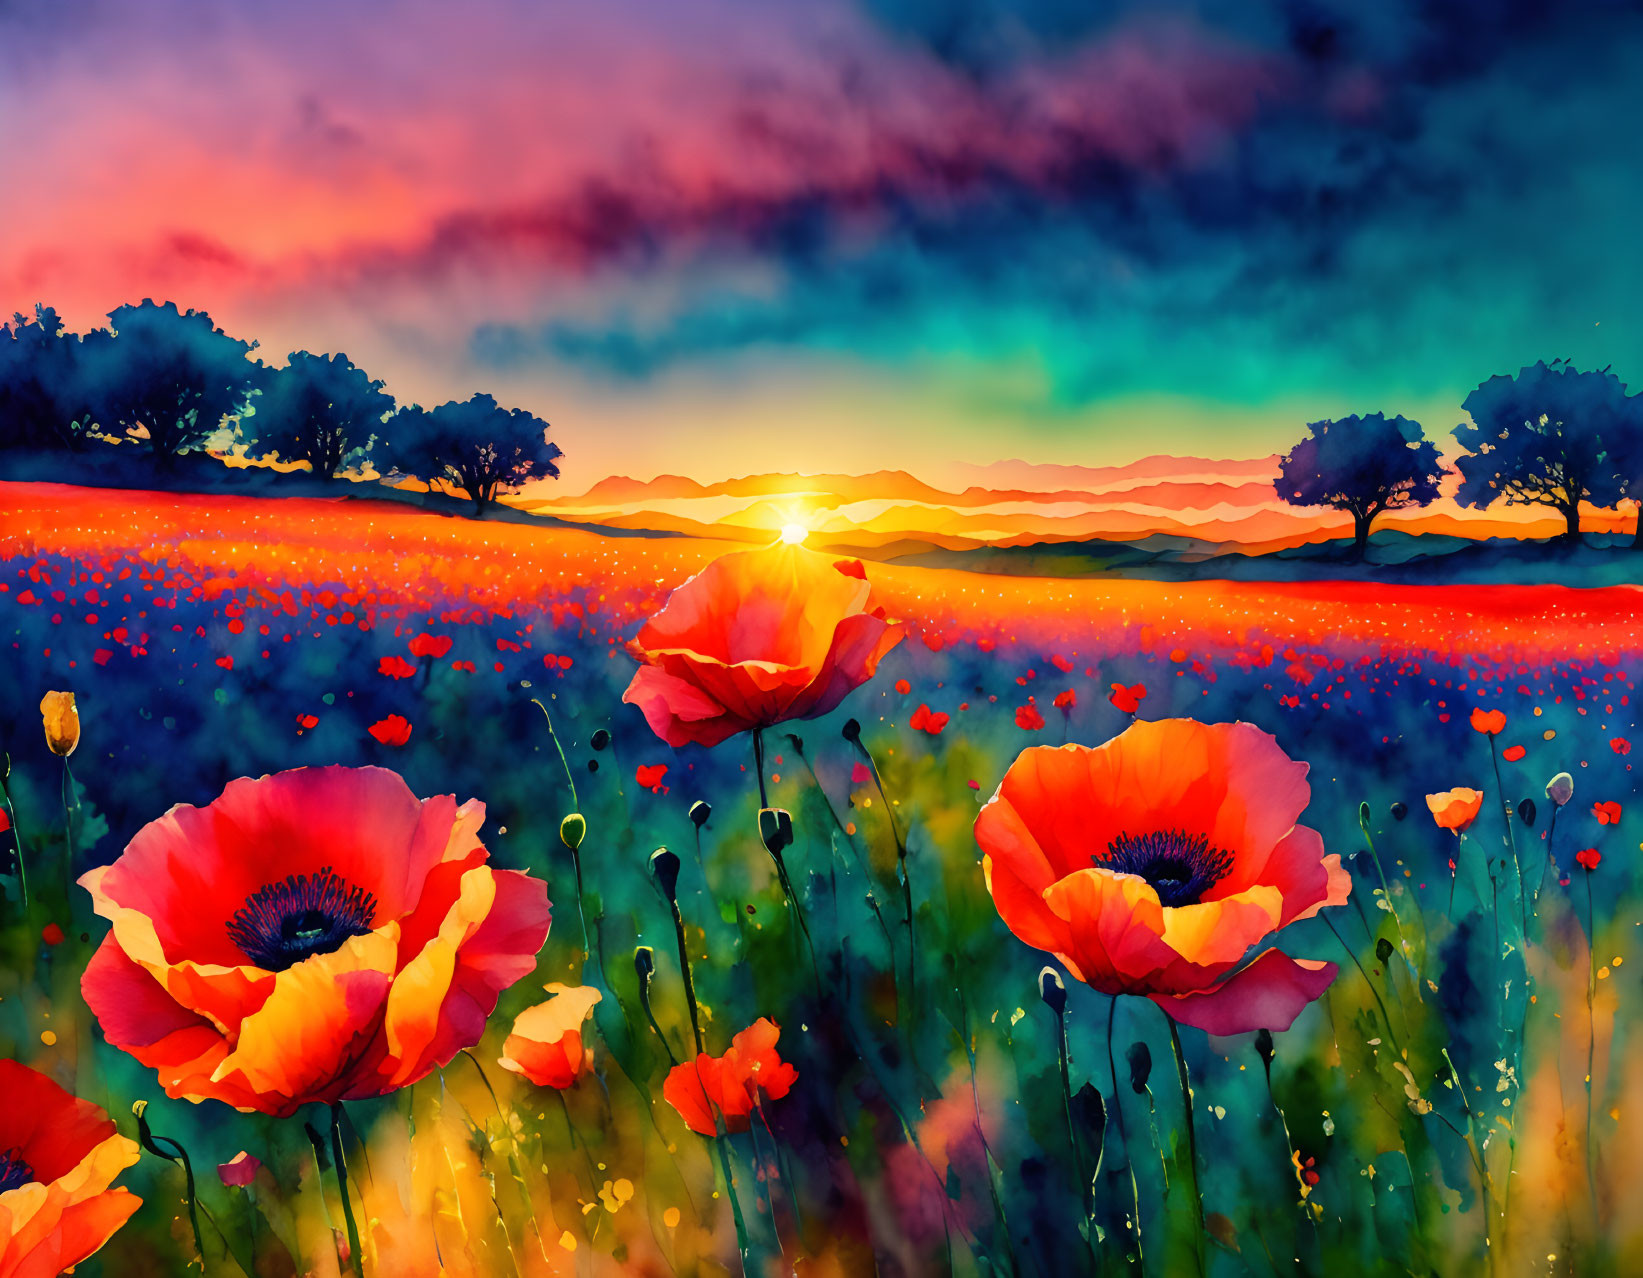 field of poppies sharp colors,watercolor style set